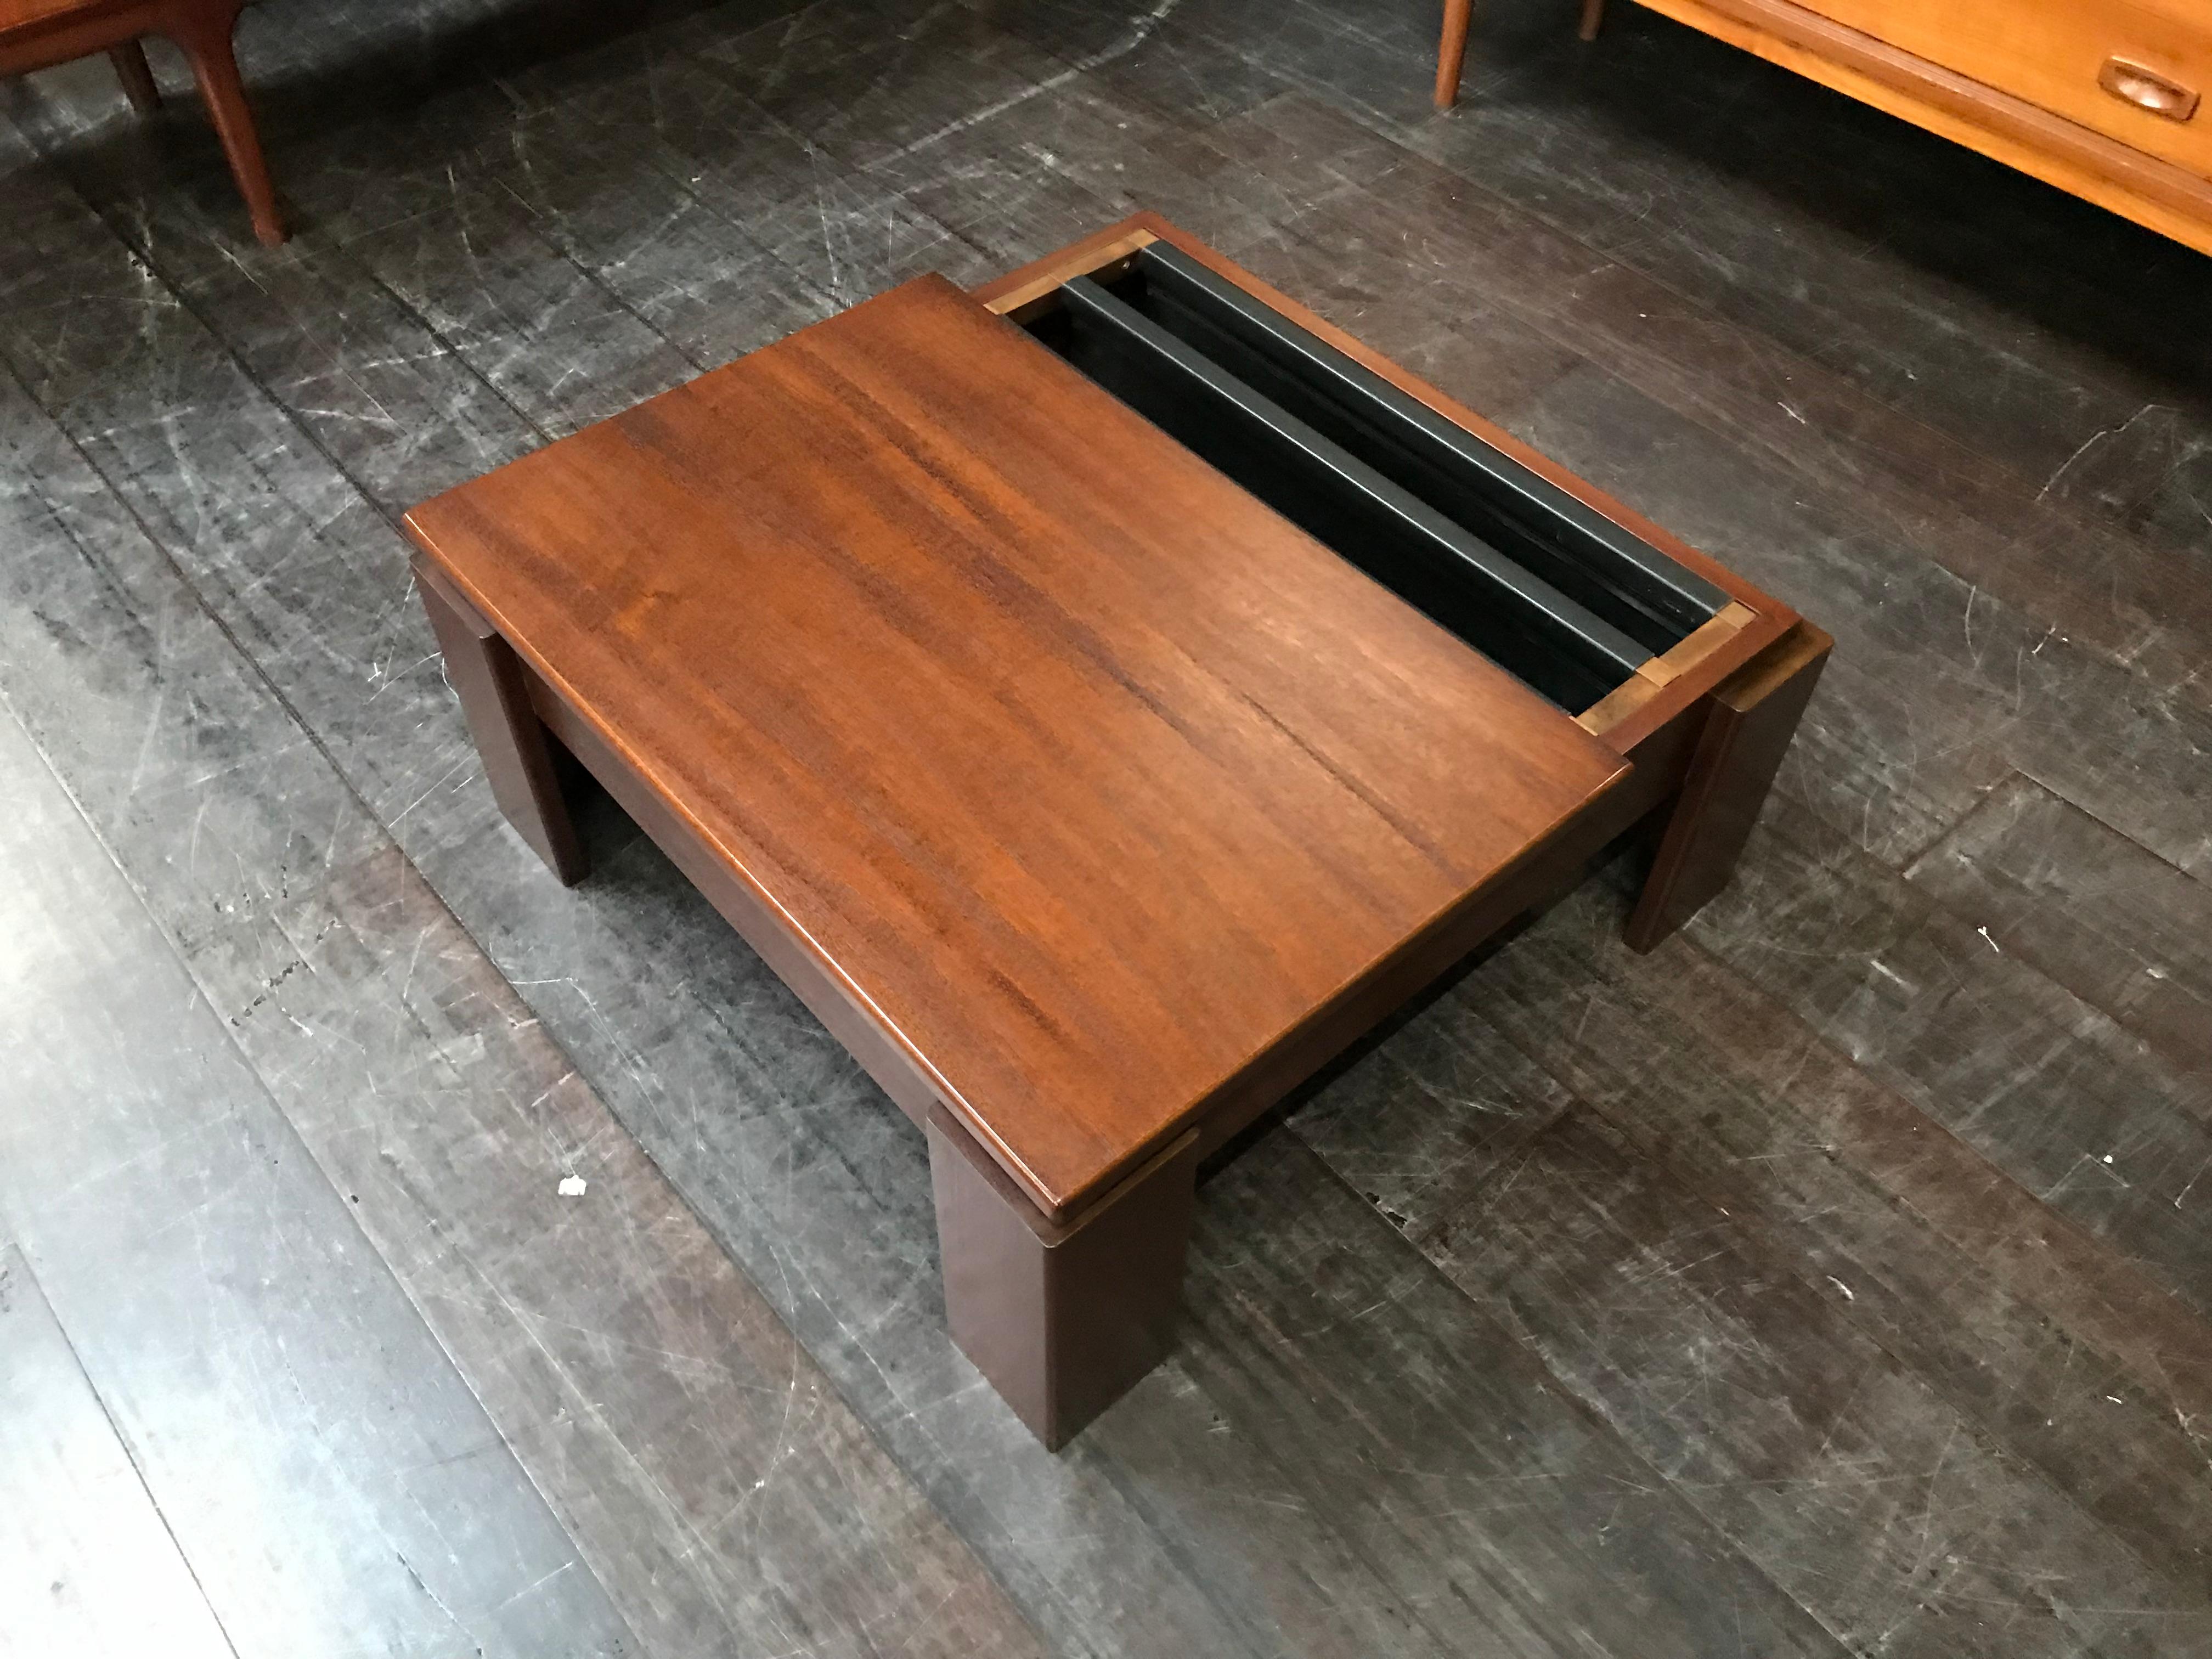 This is a super cool coffee table that has a fantastic Minimalist, almost ‘Brutalist’, look to it. The ‘pockets’ are stylishly integrated with the table and can be used for newspapers, magazines, books, etc. This very unusual table is most likely